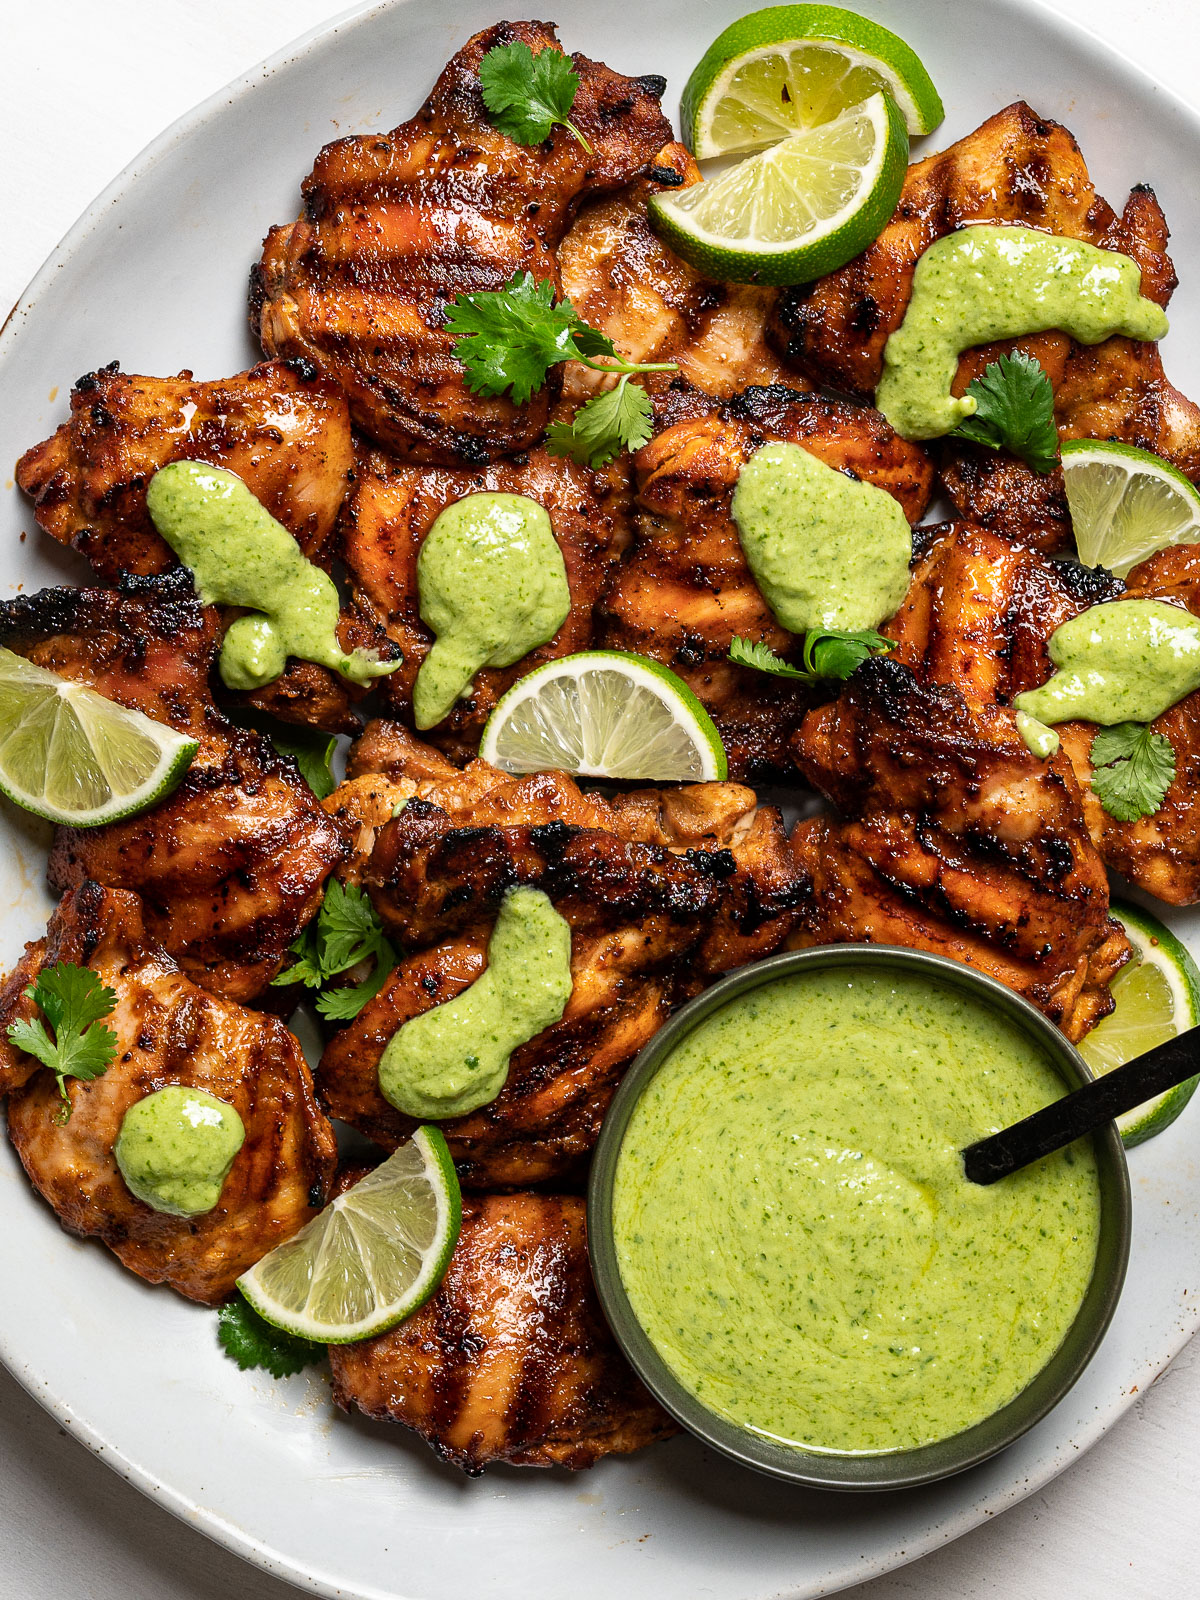 grilled chicken served on platter drizzled with green sauce